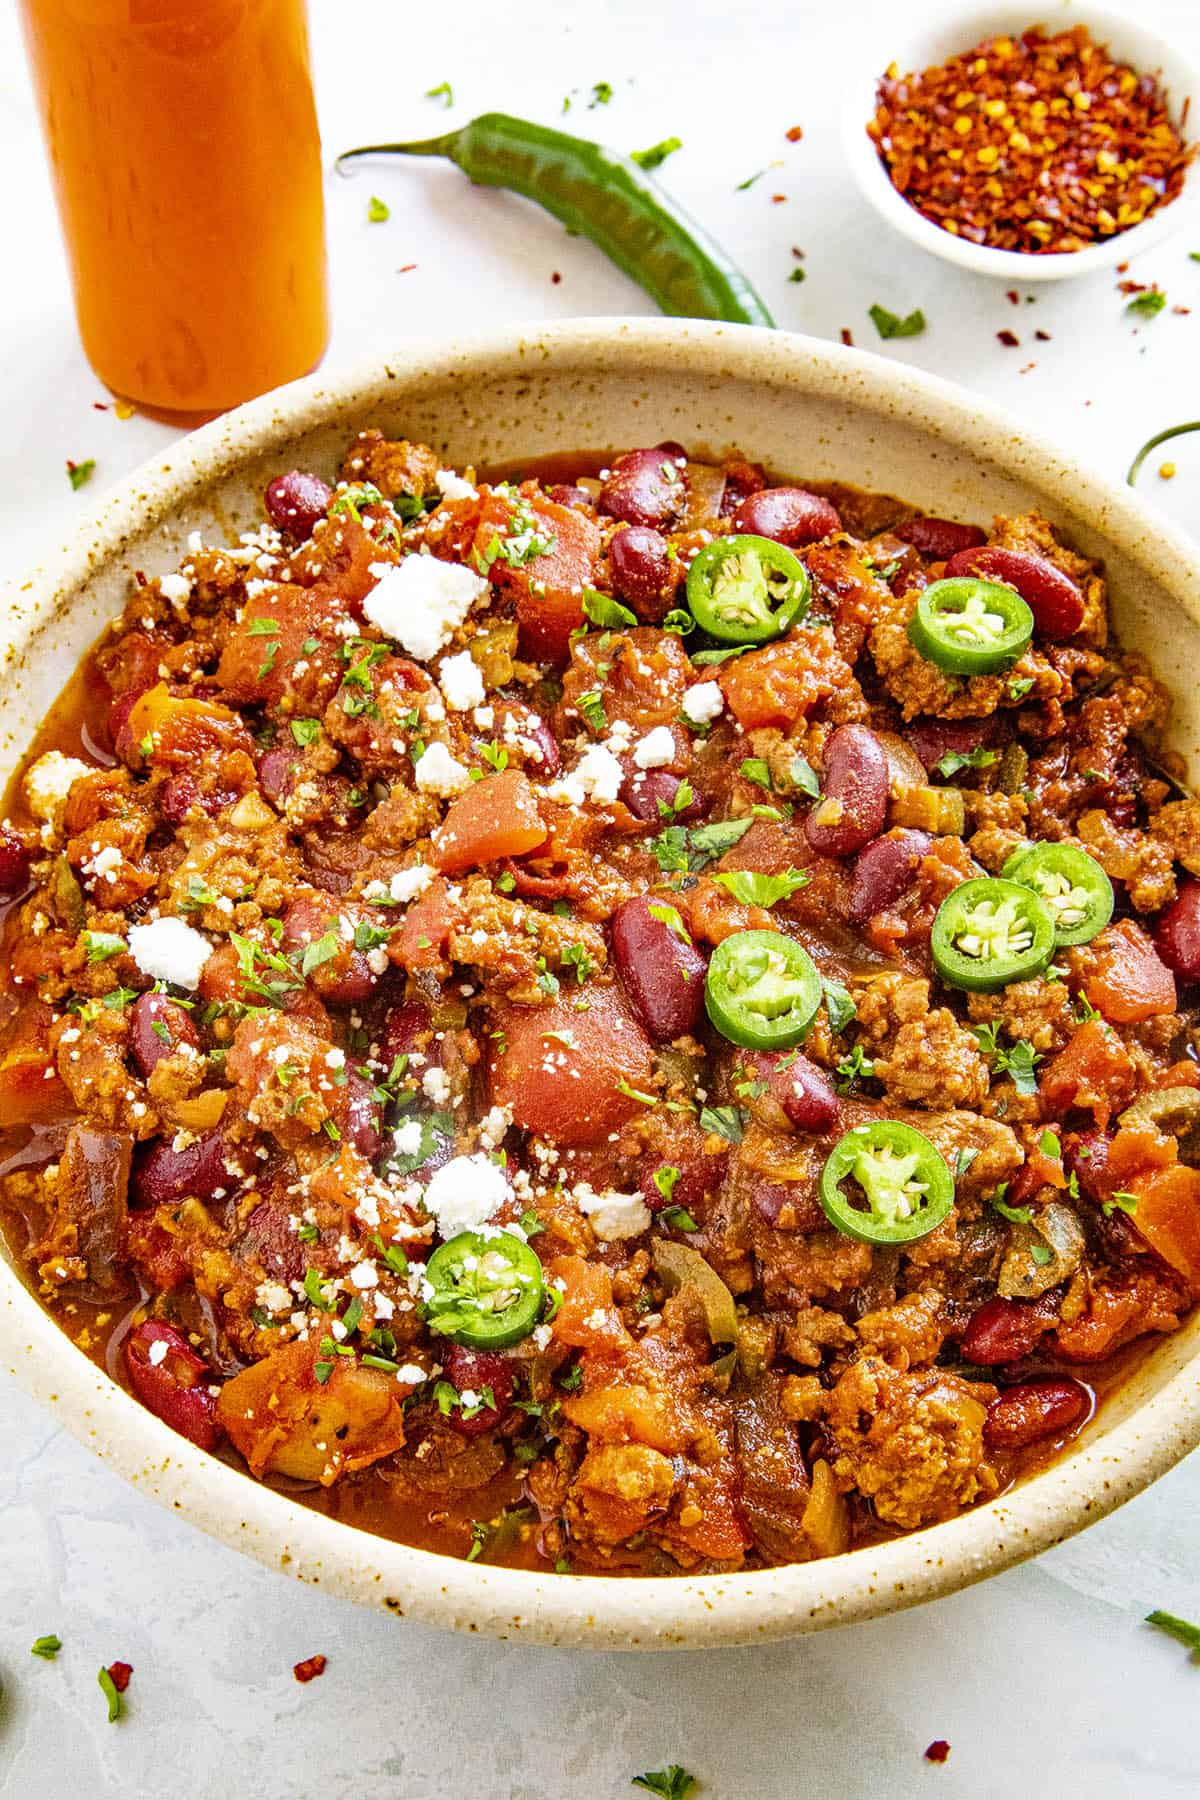 Chipotle Chili in a bowl, ready to serve